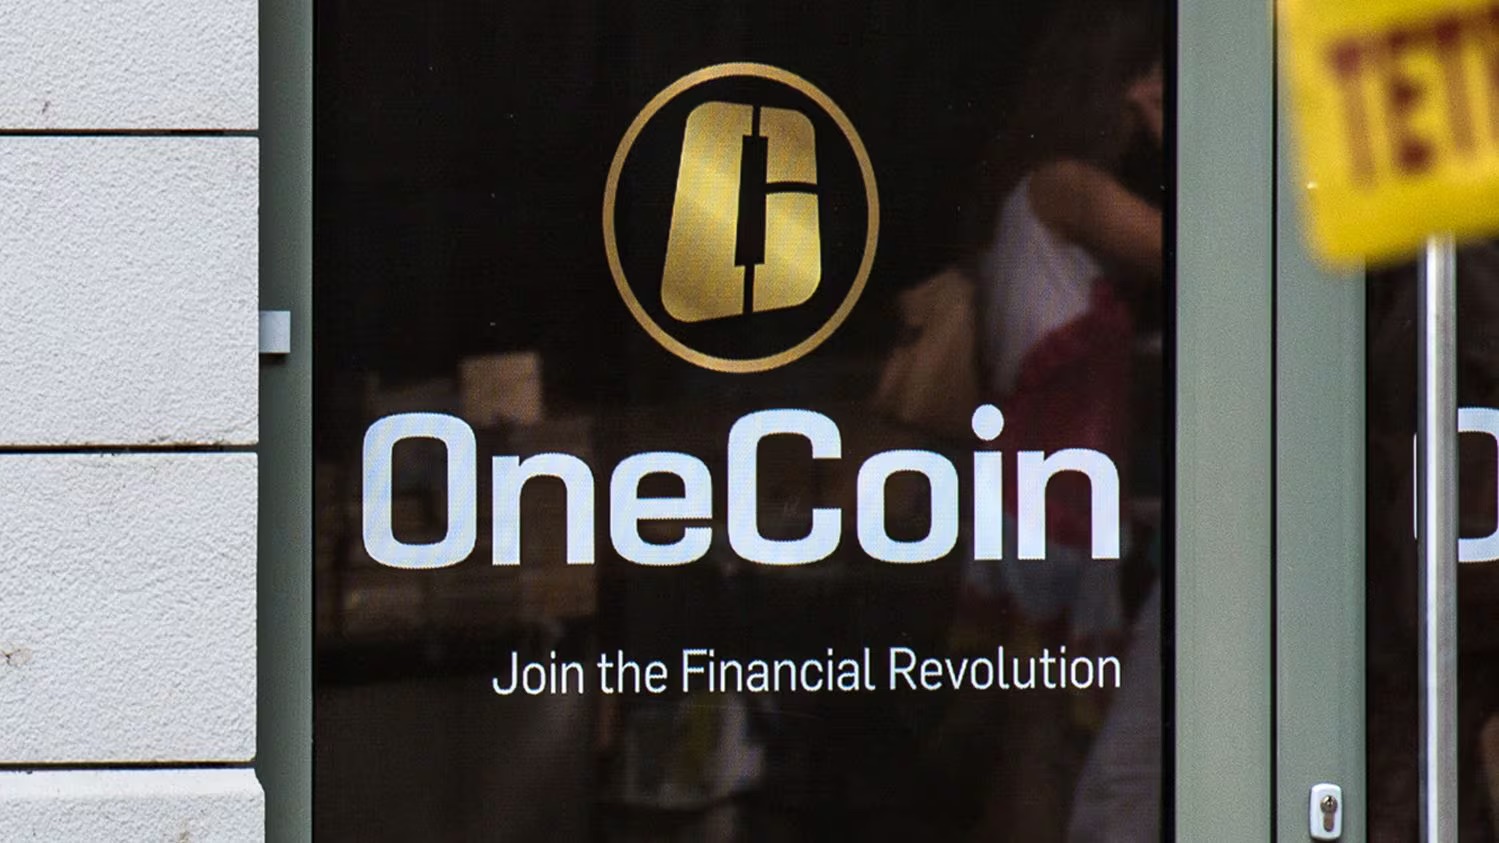 U.S. Arrests William Morro in Connection with the OneCoin Cryptocurrency Fraud